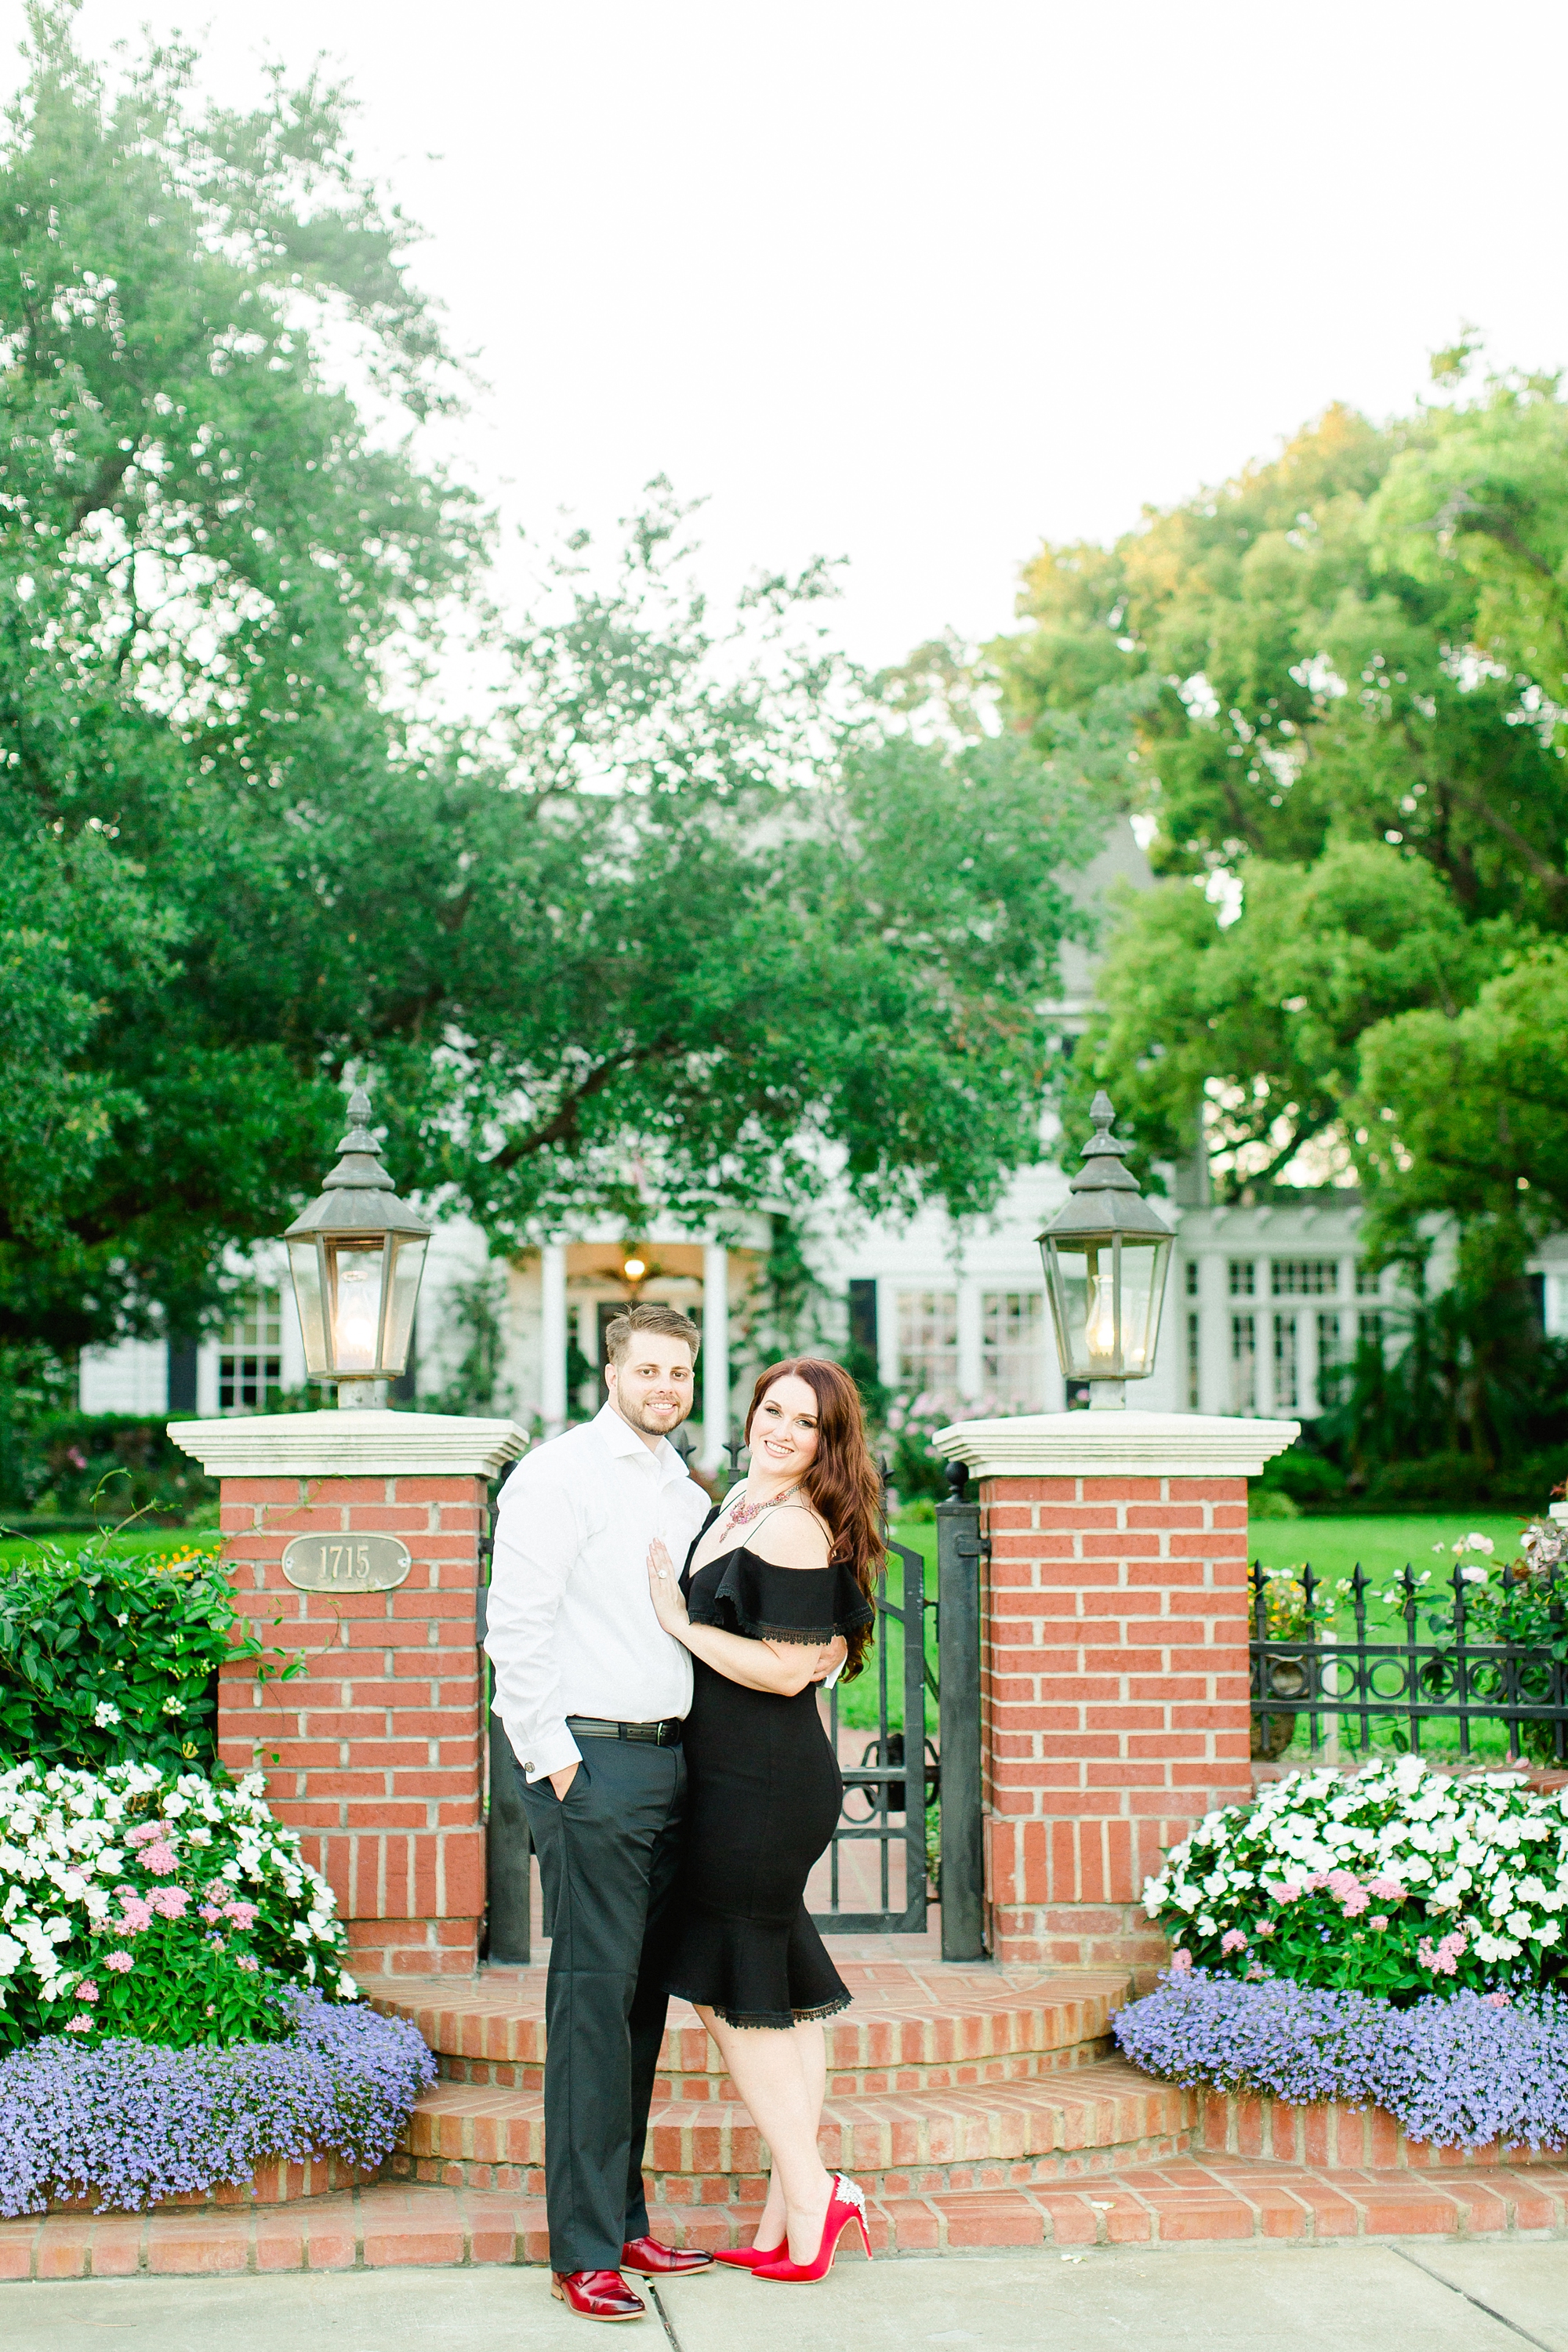 South Tampa Engagement | © Ailyn La Torre Photography 2019